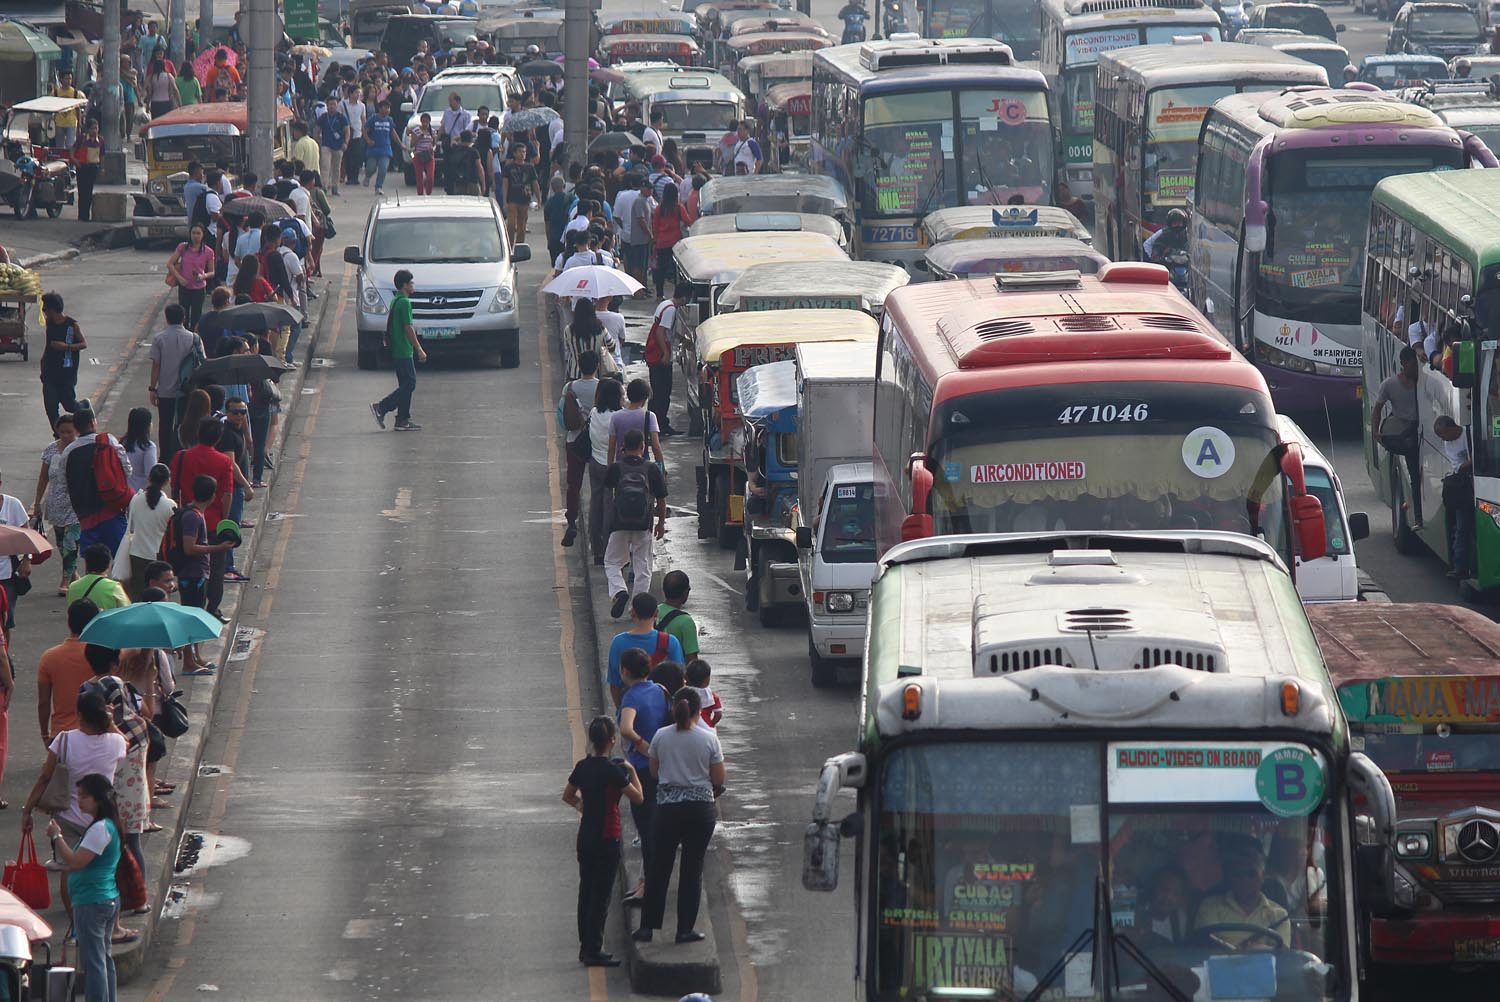 Traffic officials told: Tow illegally parked vehicles around EDSA